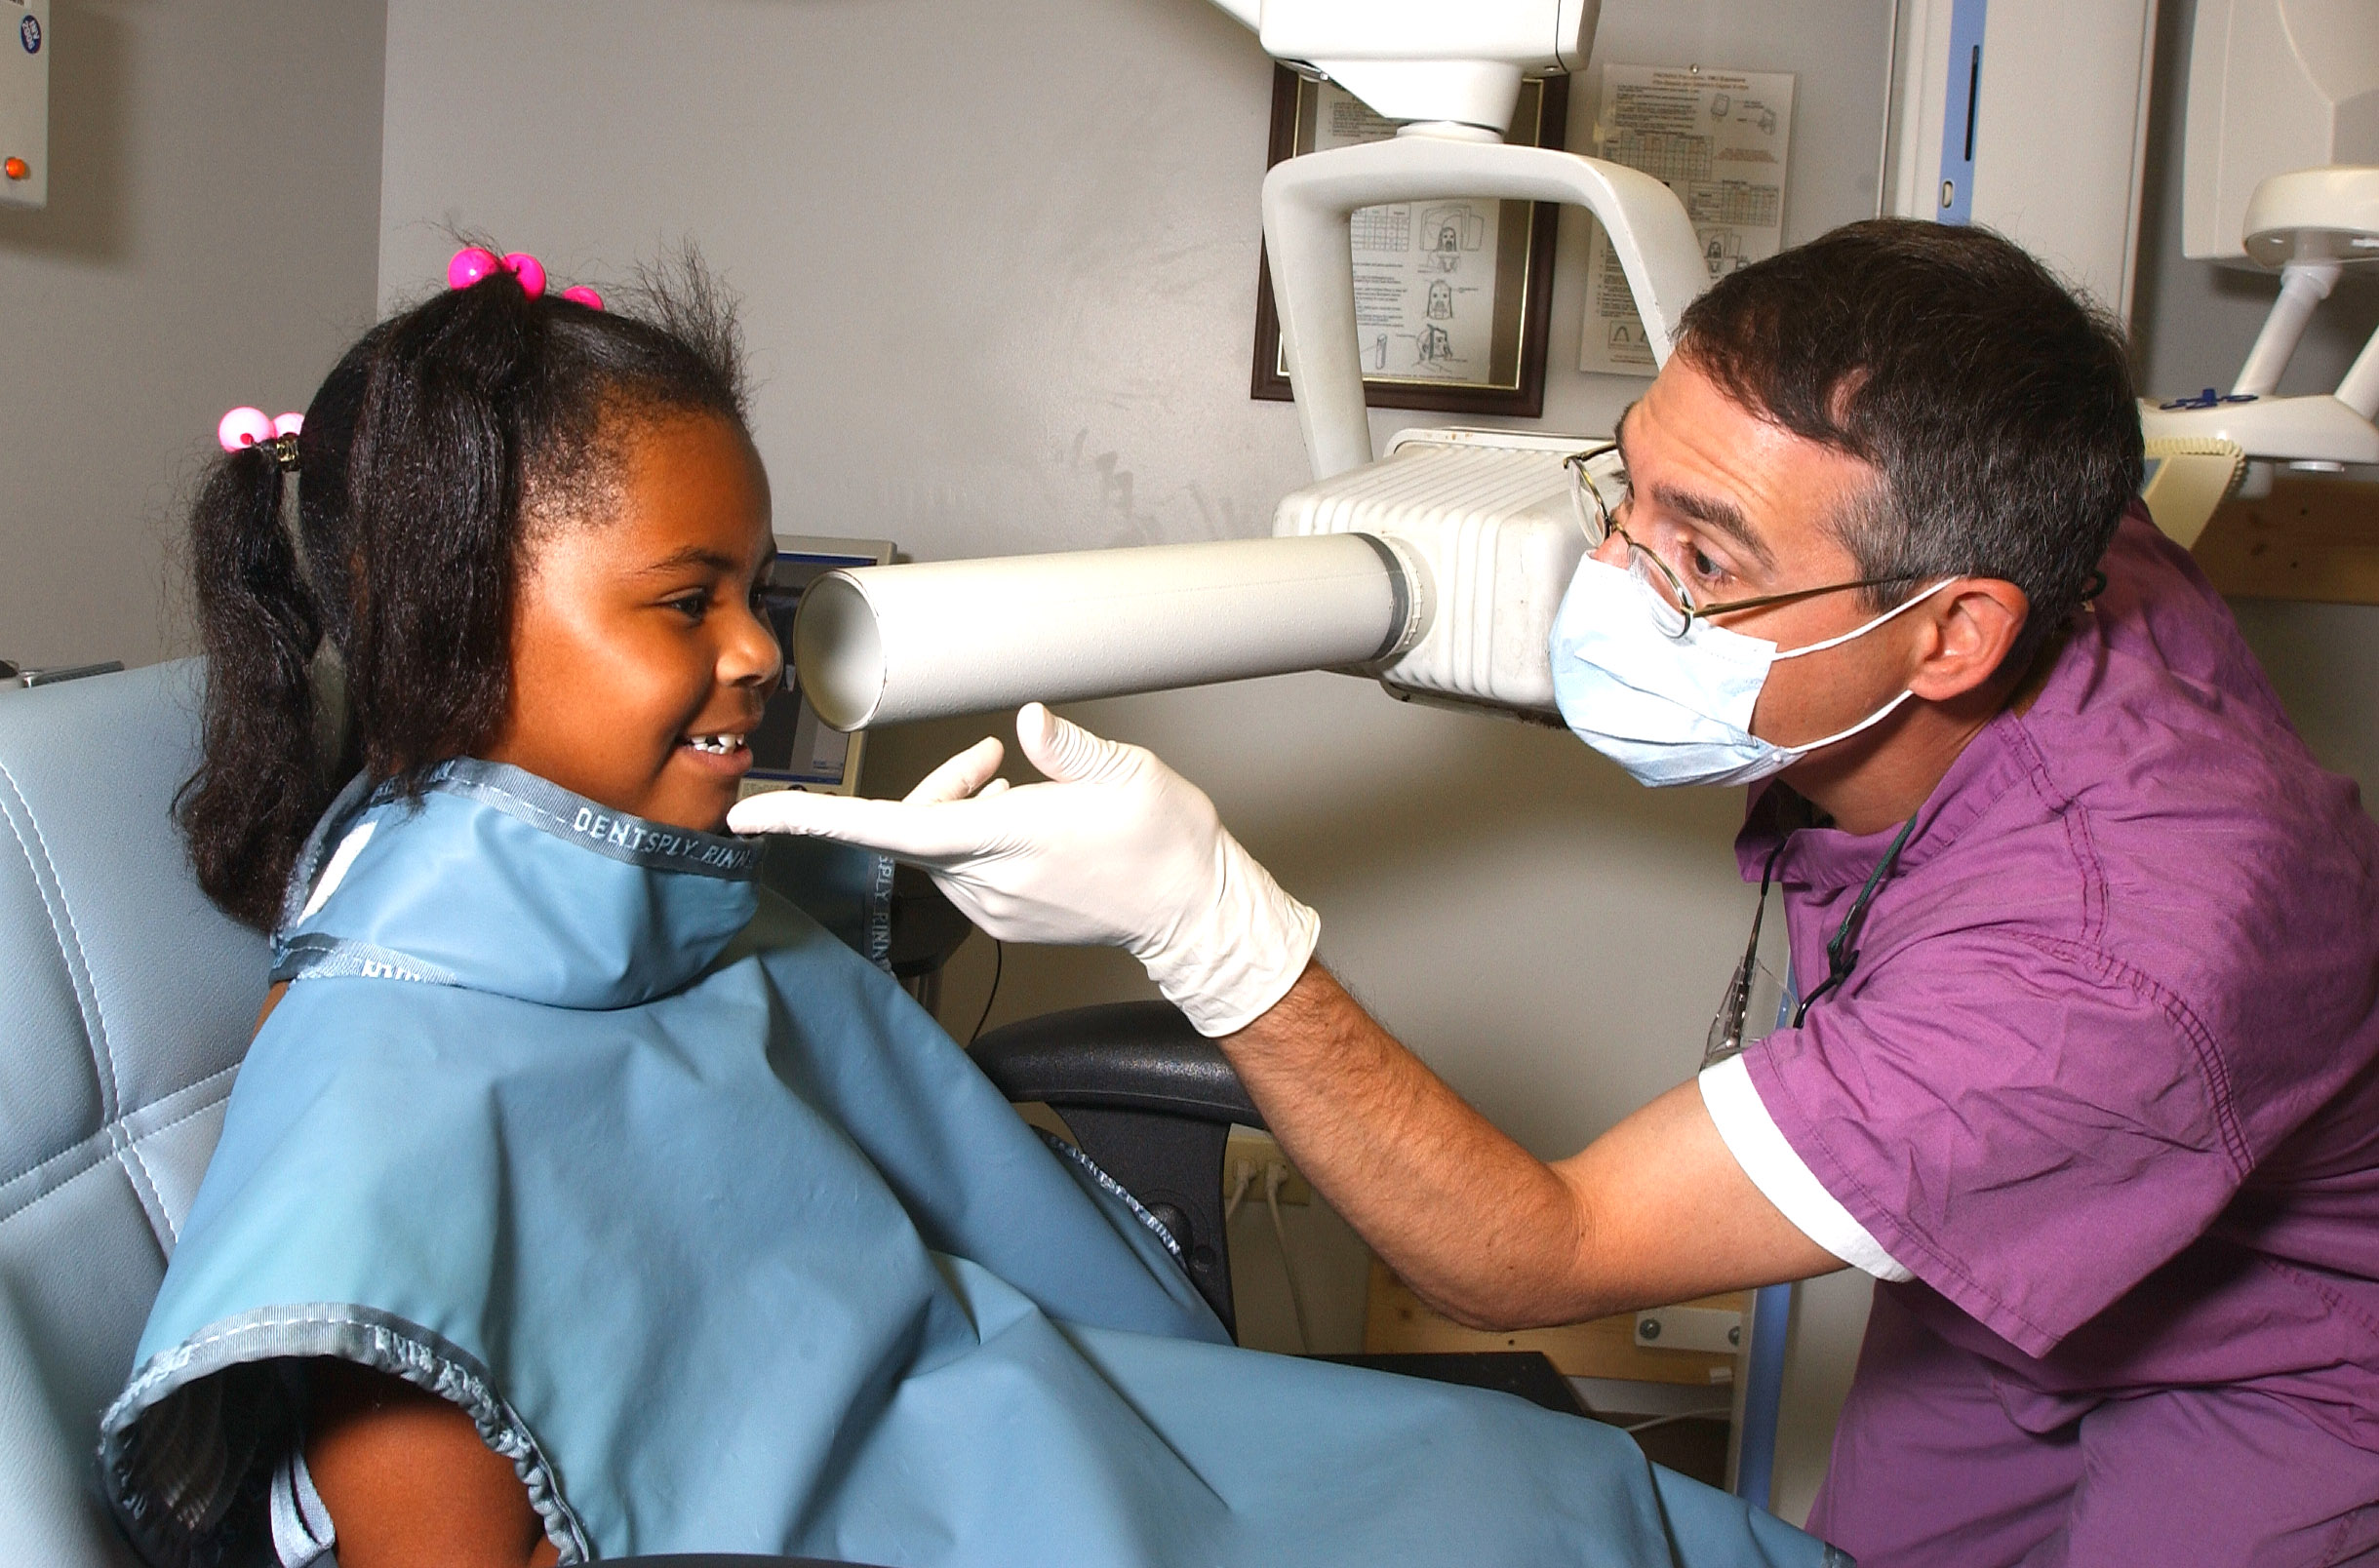 pediatric dentist (kid's dentist) helping a young girl in the dentist's chair